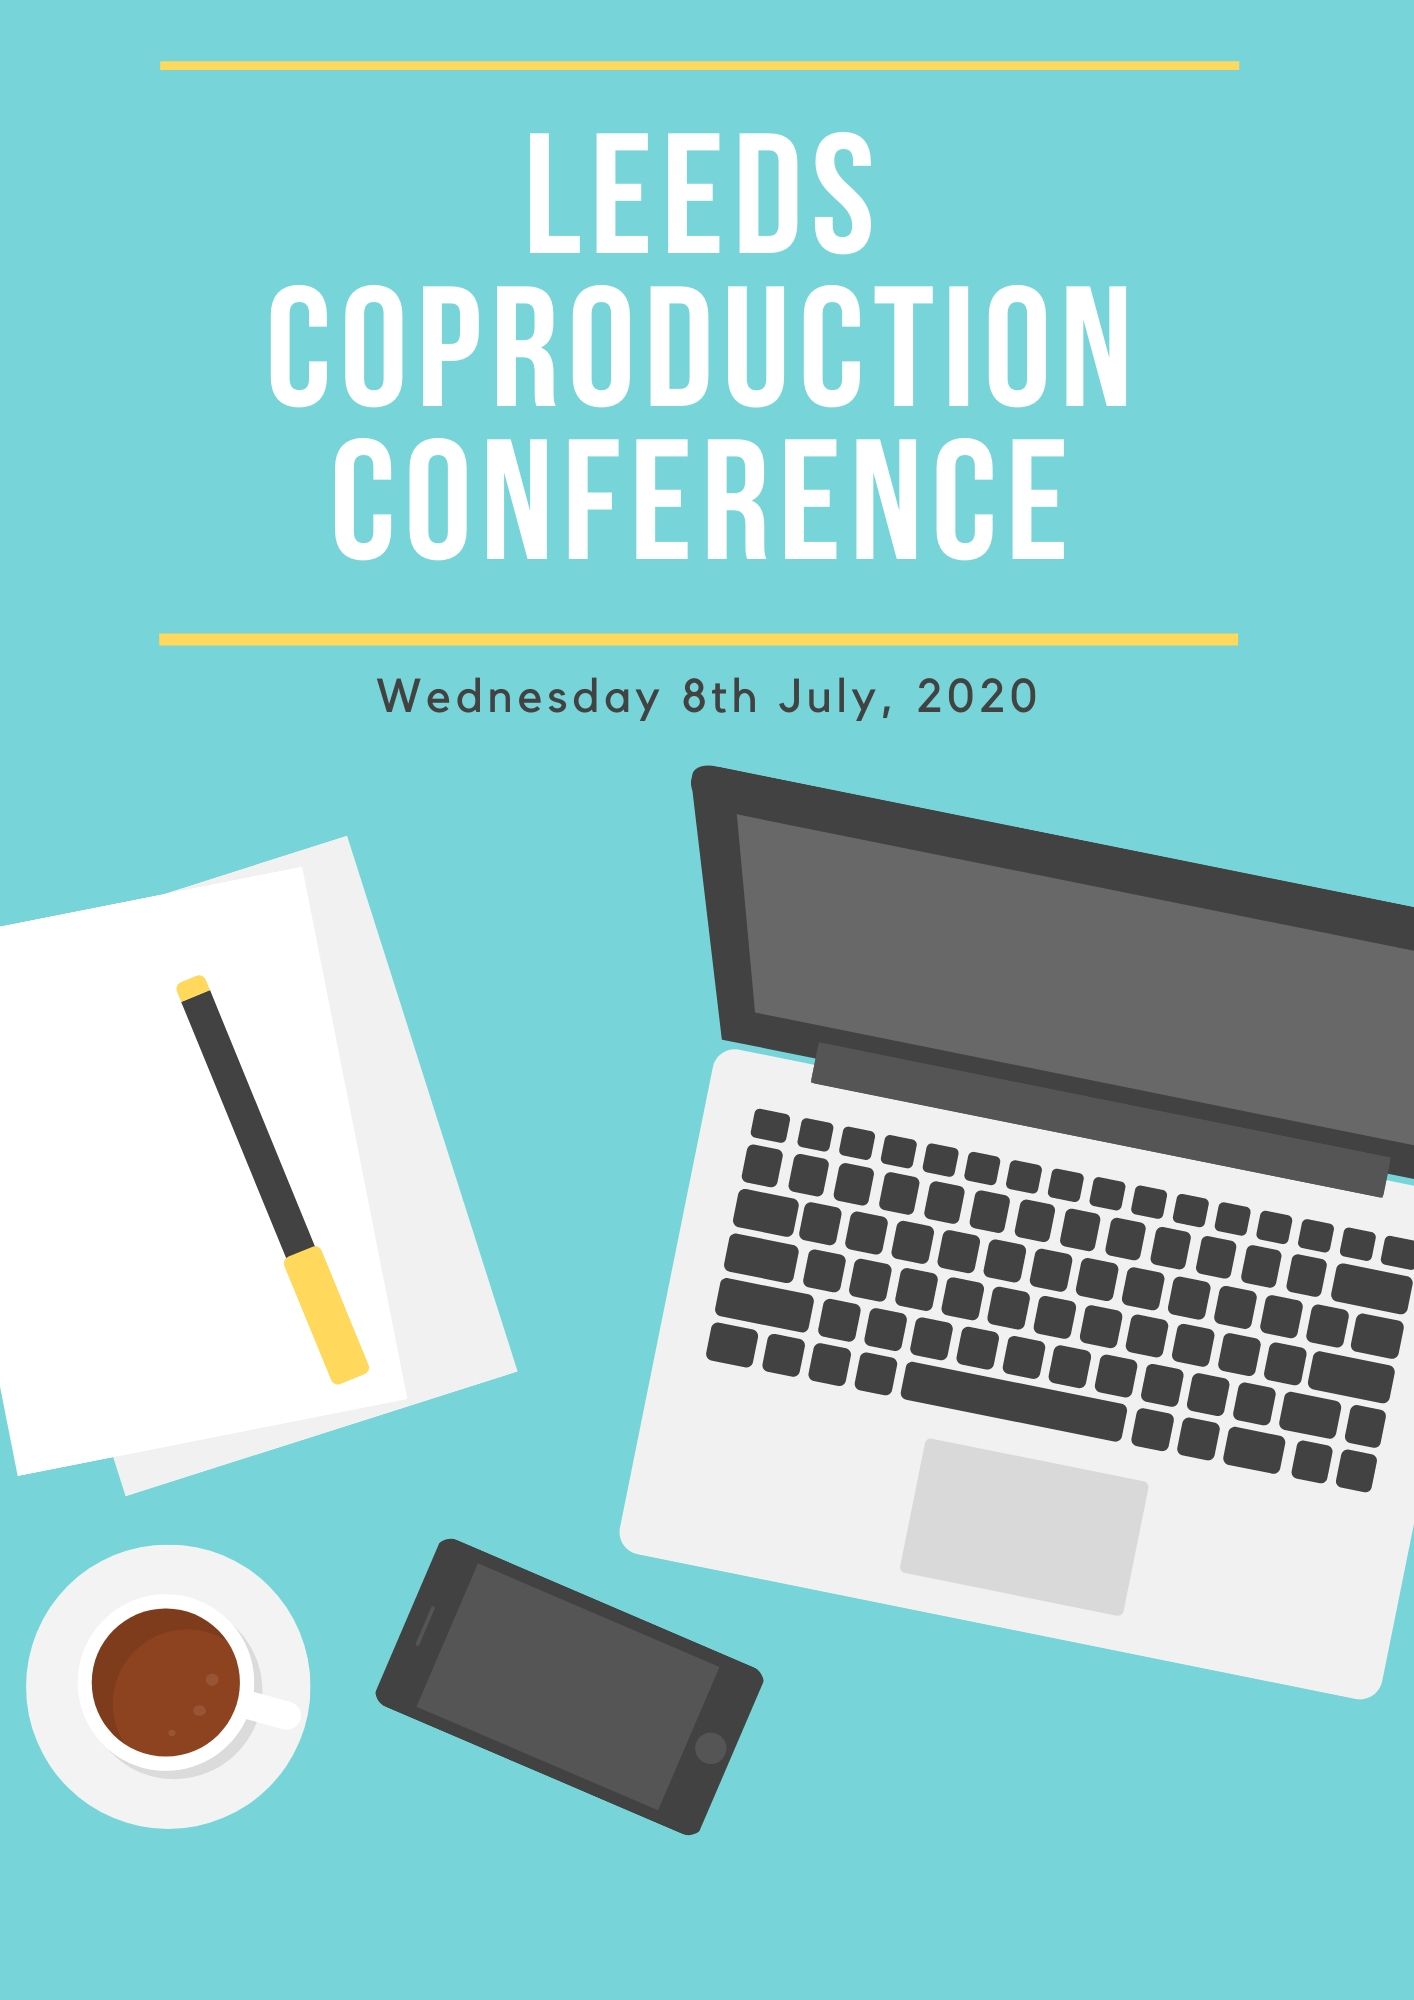 Leeds Coproduction Conference – Wednesday 8th July, 2020